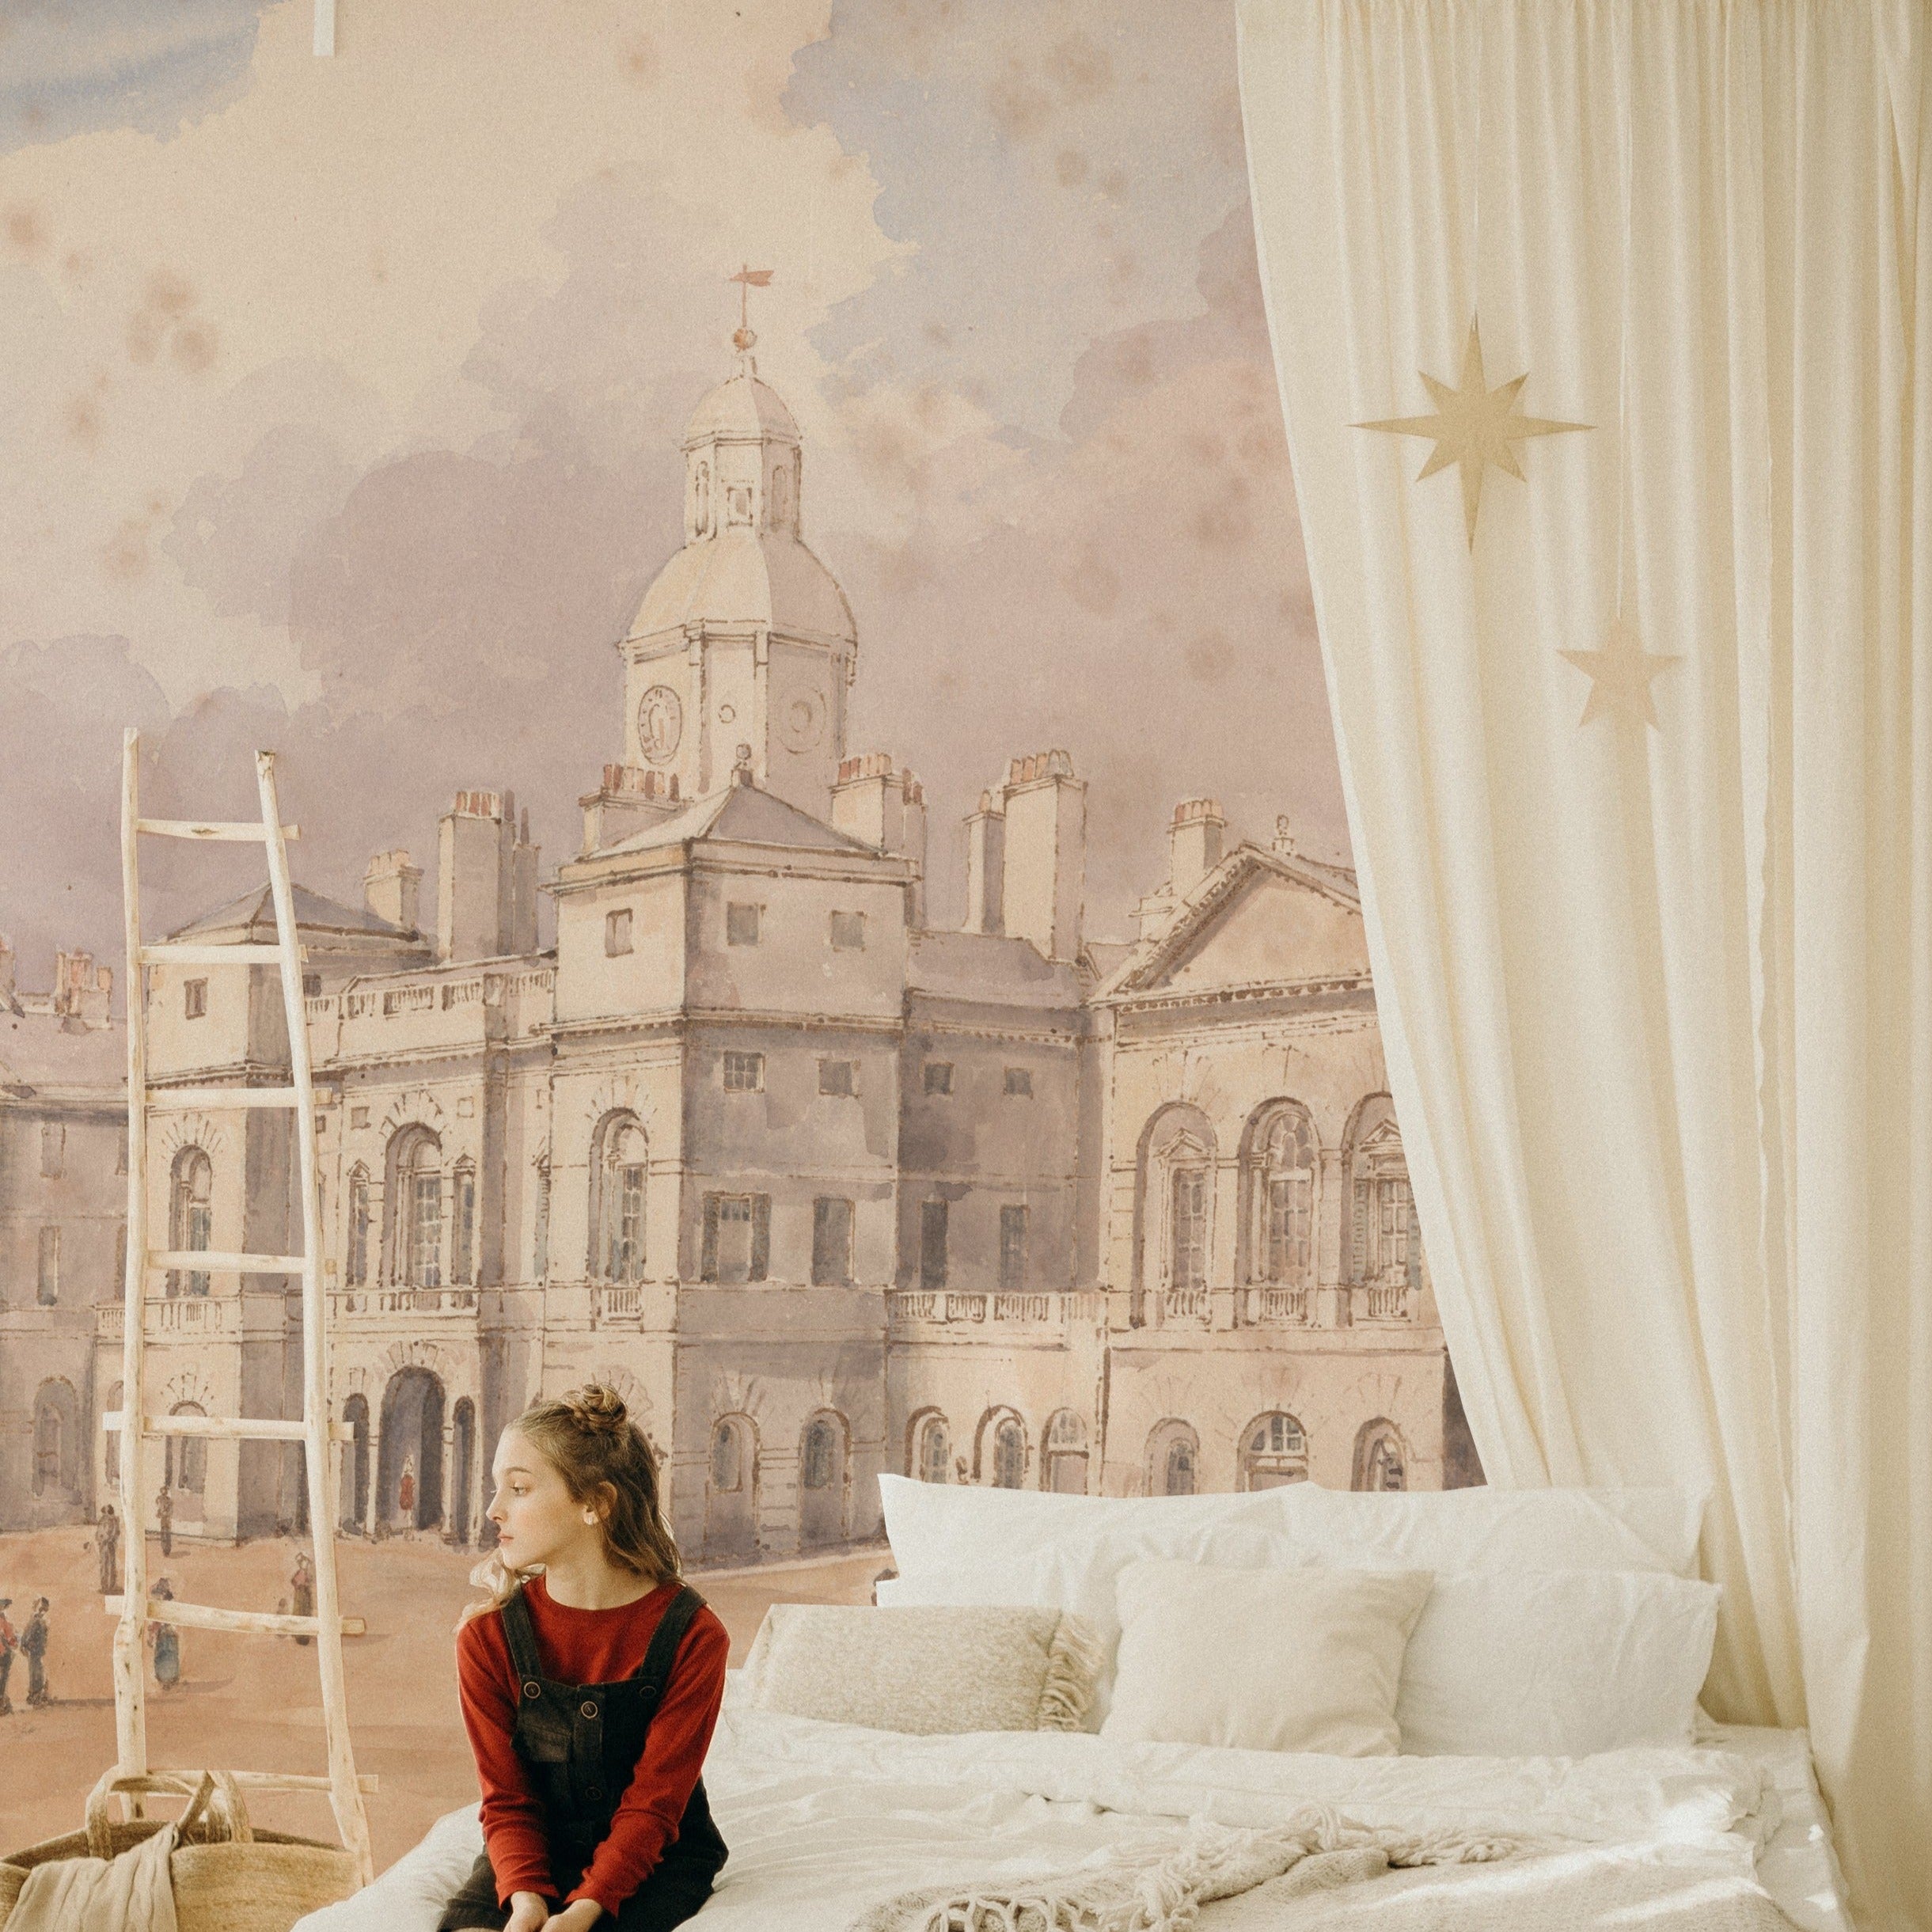 A child's bedroom with a whimsical touch, featuring the "Parade" wallpaper mural as a backdrop. The mural's historic cityscape is paired with simple, cozy bedding and a star-adorned curtain, creating a dreamy atmosphere.